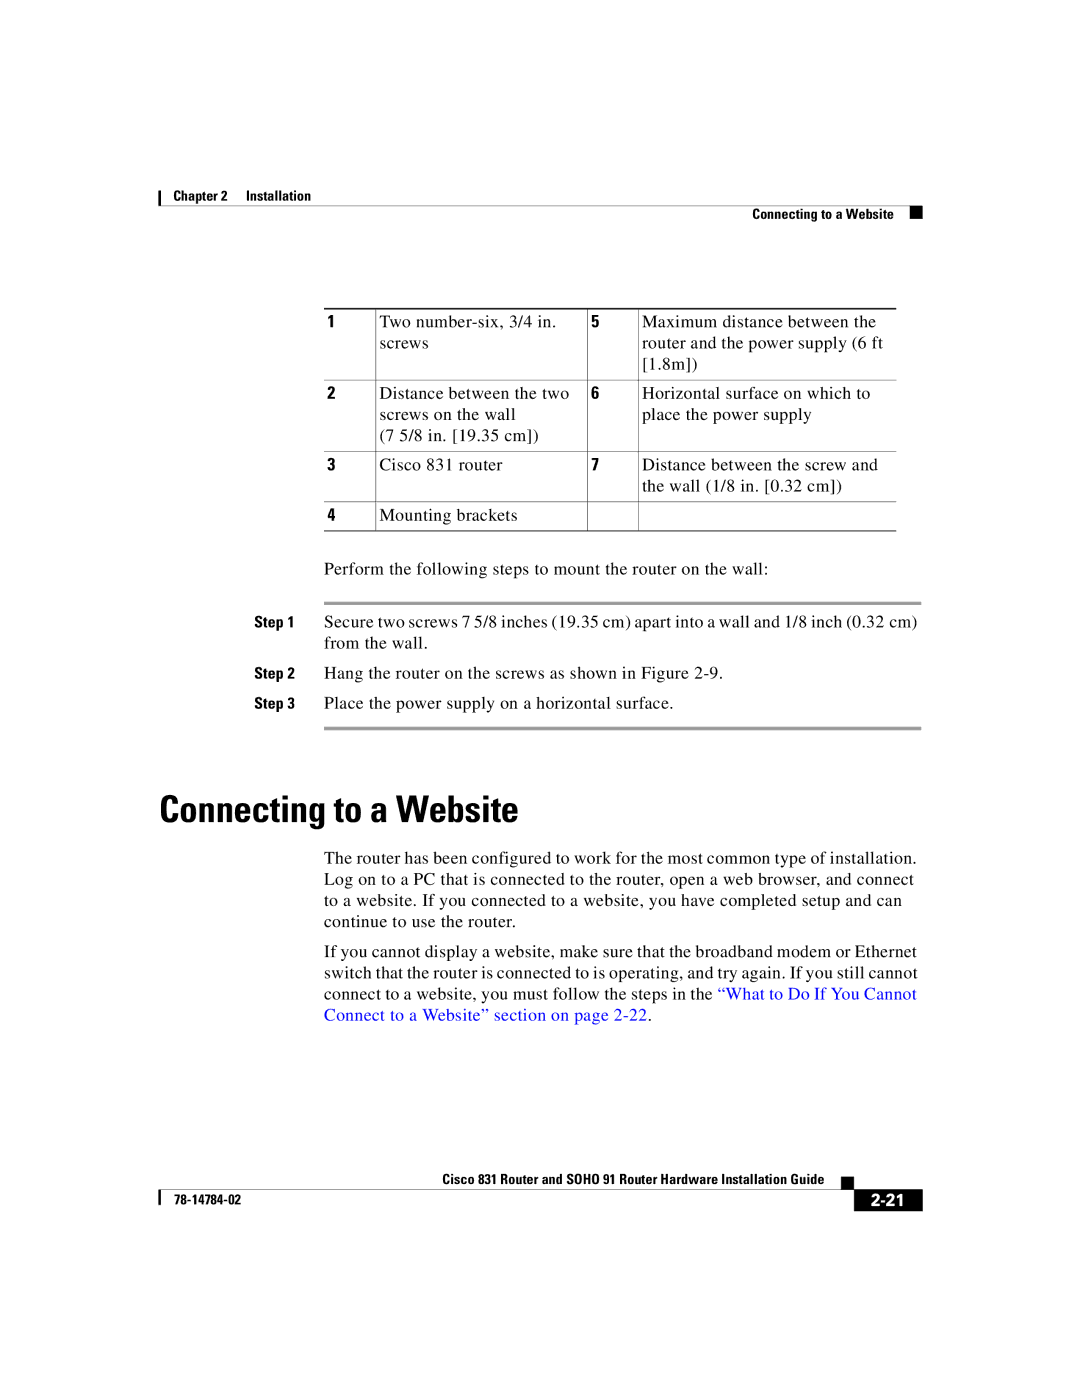 Cisco Systems Cisco 831 manual Connecting to a Website 